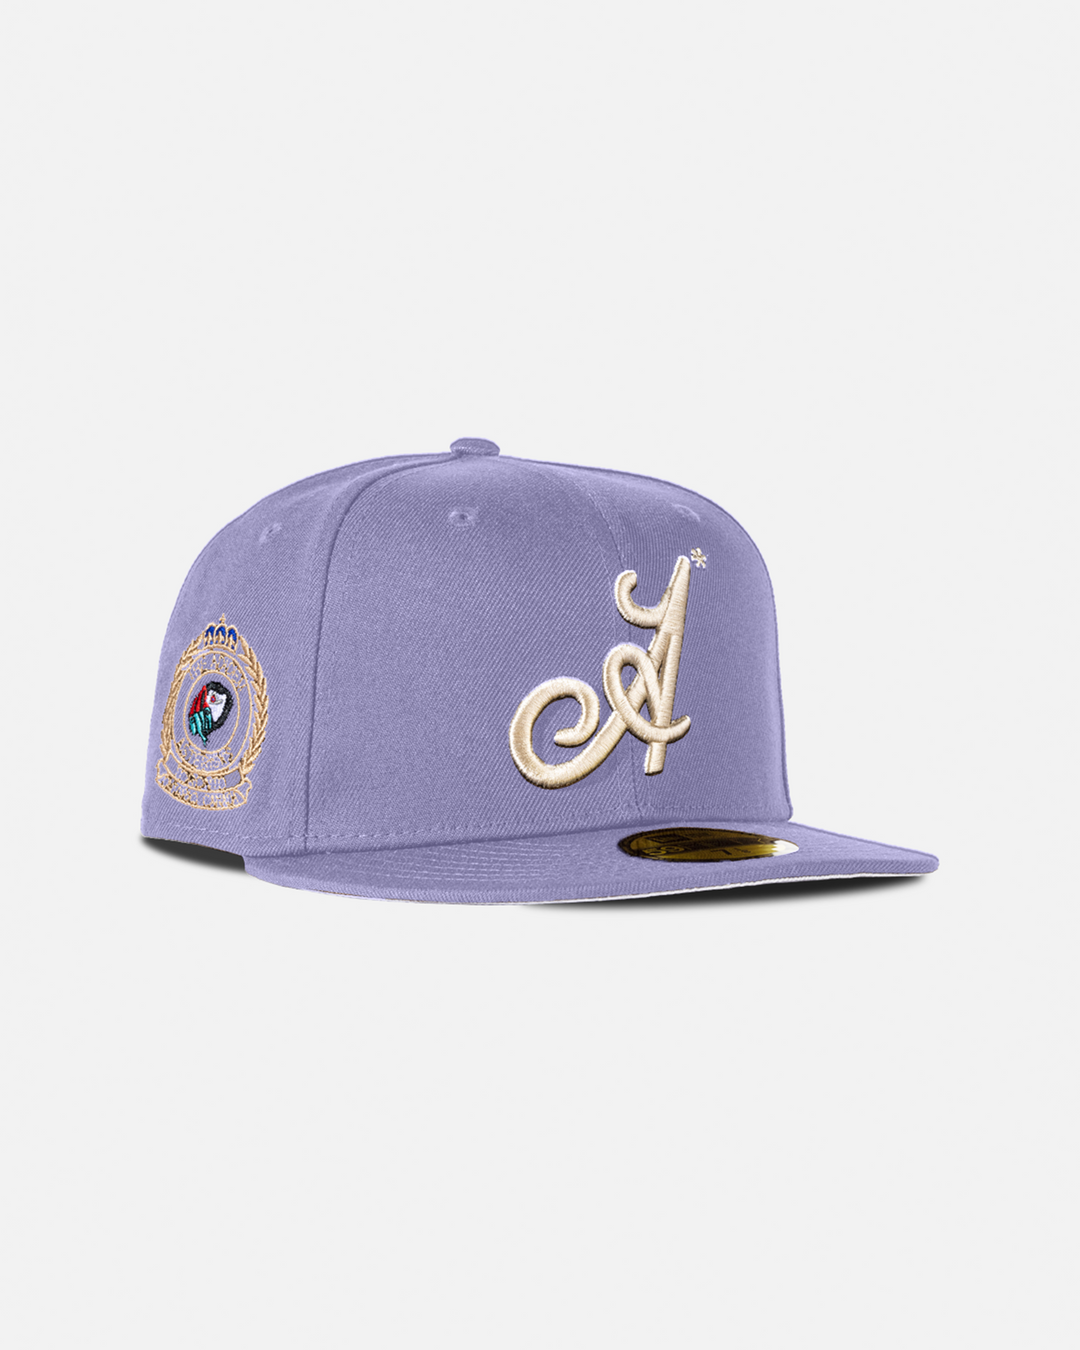 New Era Fitted - Lavender (Series B)